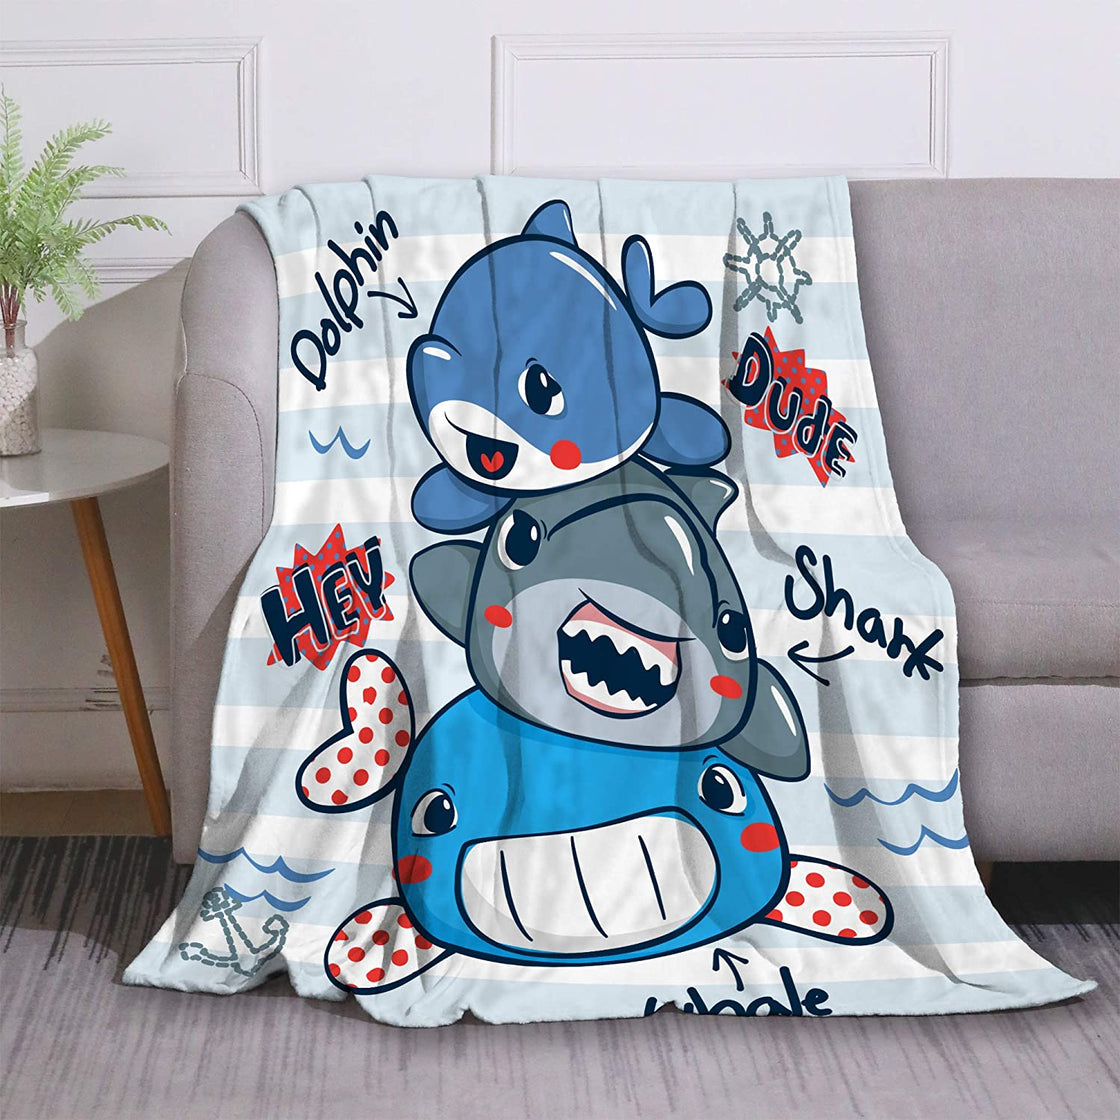 animals and whales Flannel Fleece Throw Blanket